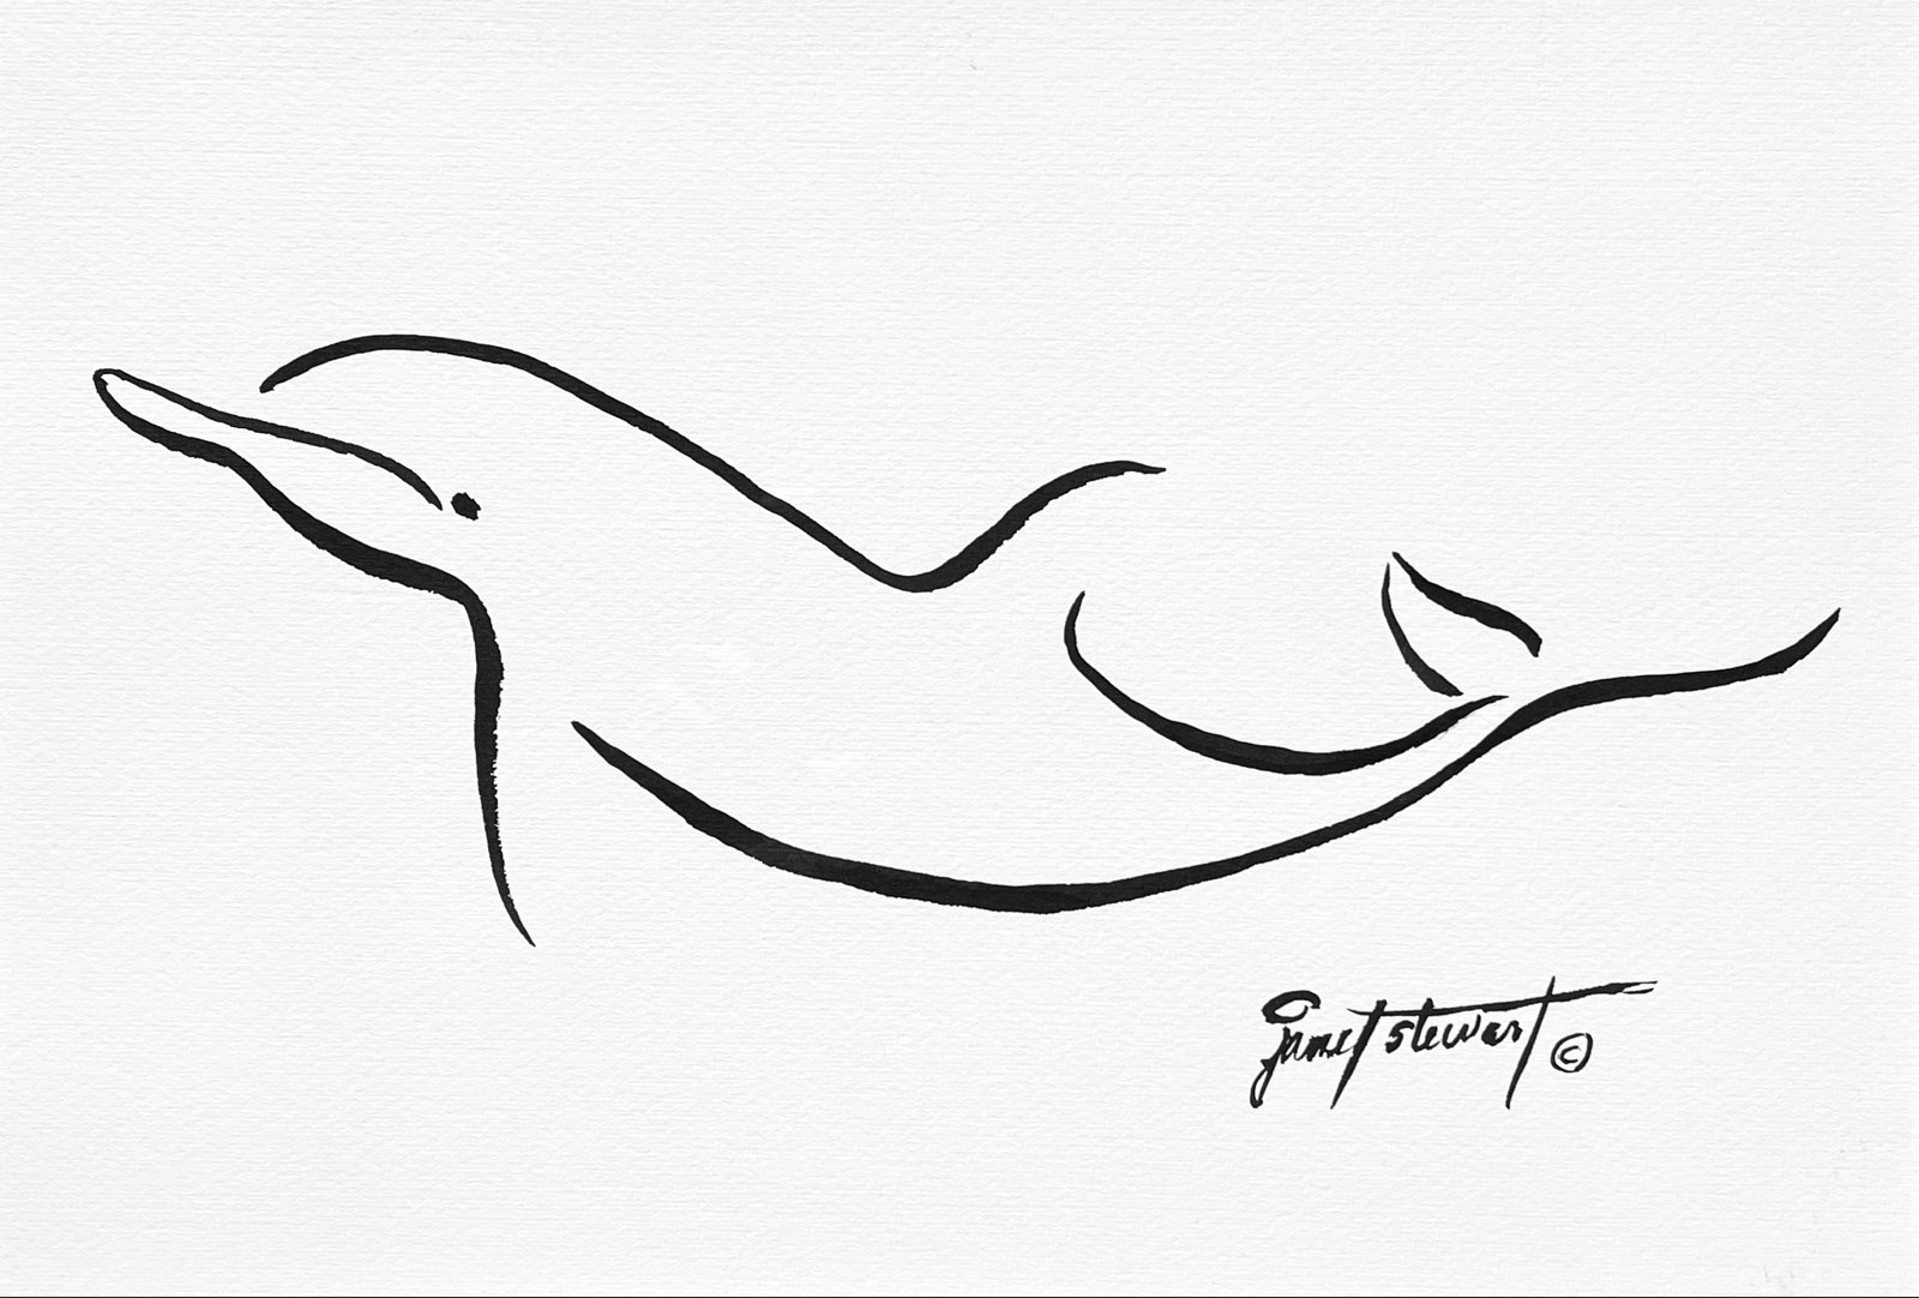 Smiling Dolphin by Janet Stewart